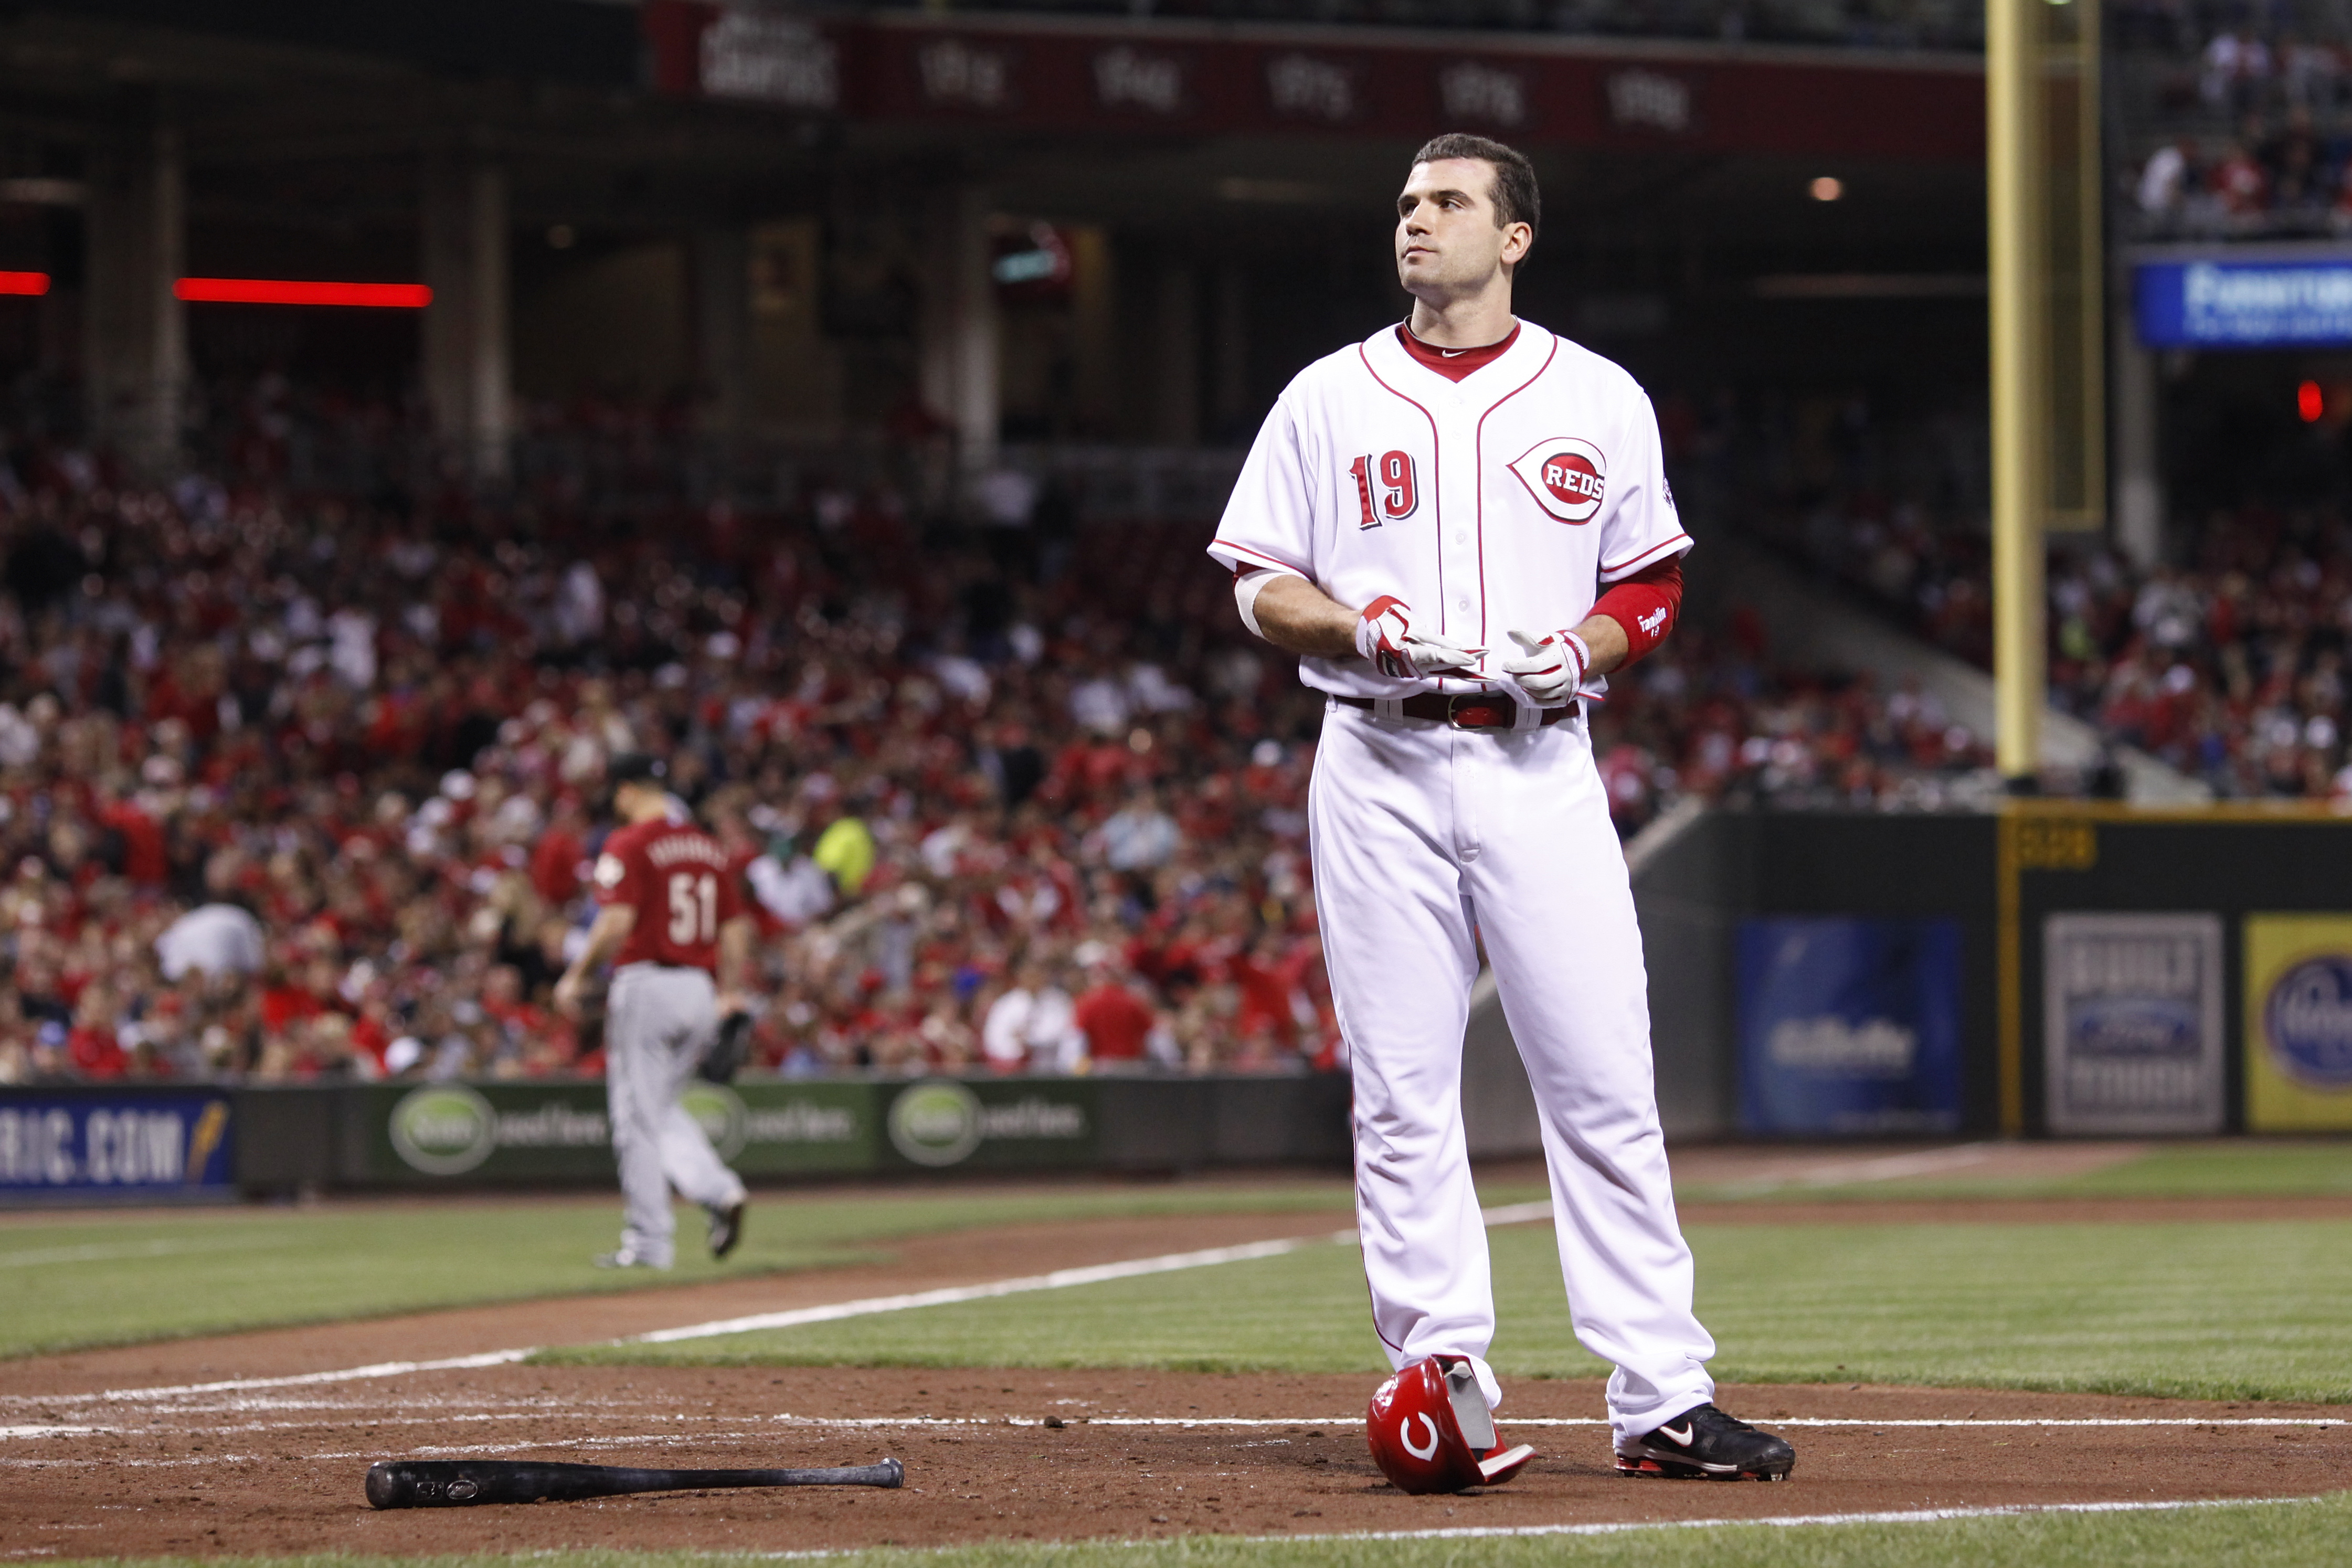 CINCINNATI, OH - SEPTEMBER 28: Joey Votto #19 of the Cincinnati Reds looks on after striking out against the Houston Astros at Great American Ball Park on September 28, 2010 in Cincinnati, Ohio. The Reds won 3-2 to clinch the NL Central Division title. (P